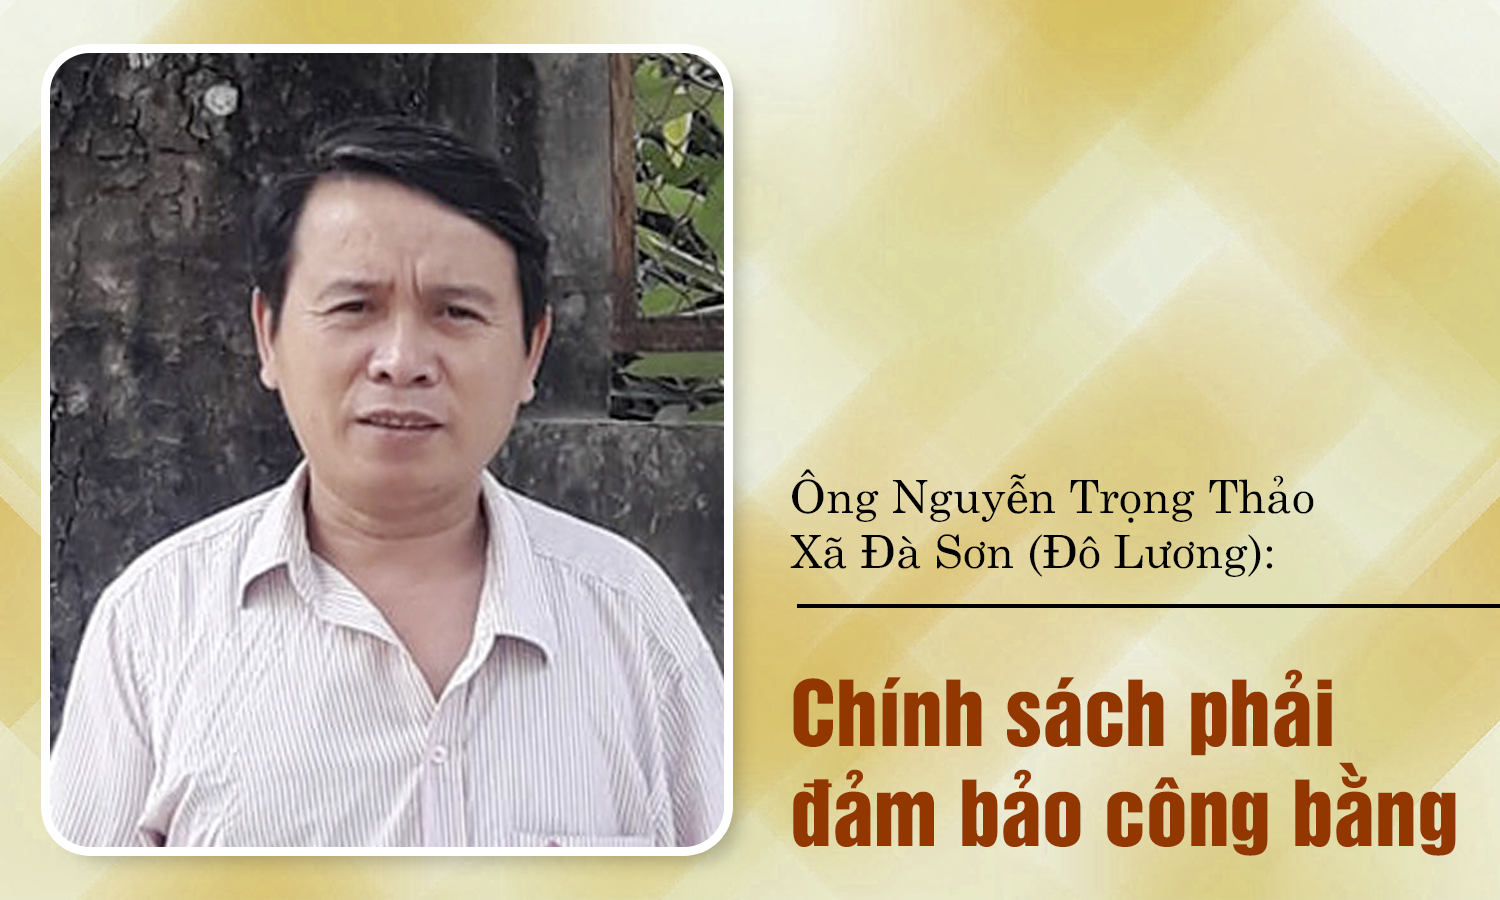 nguyen_trong_thao5259213_8122021.png